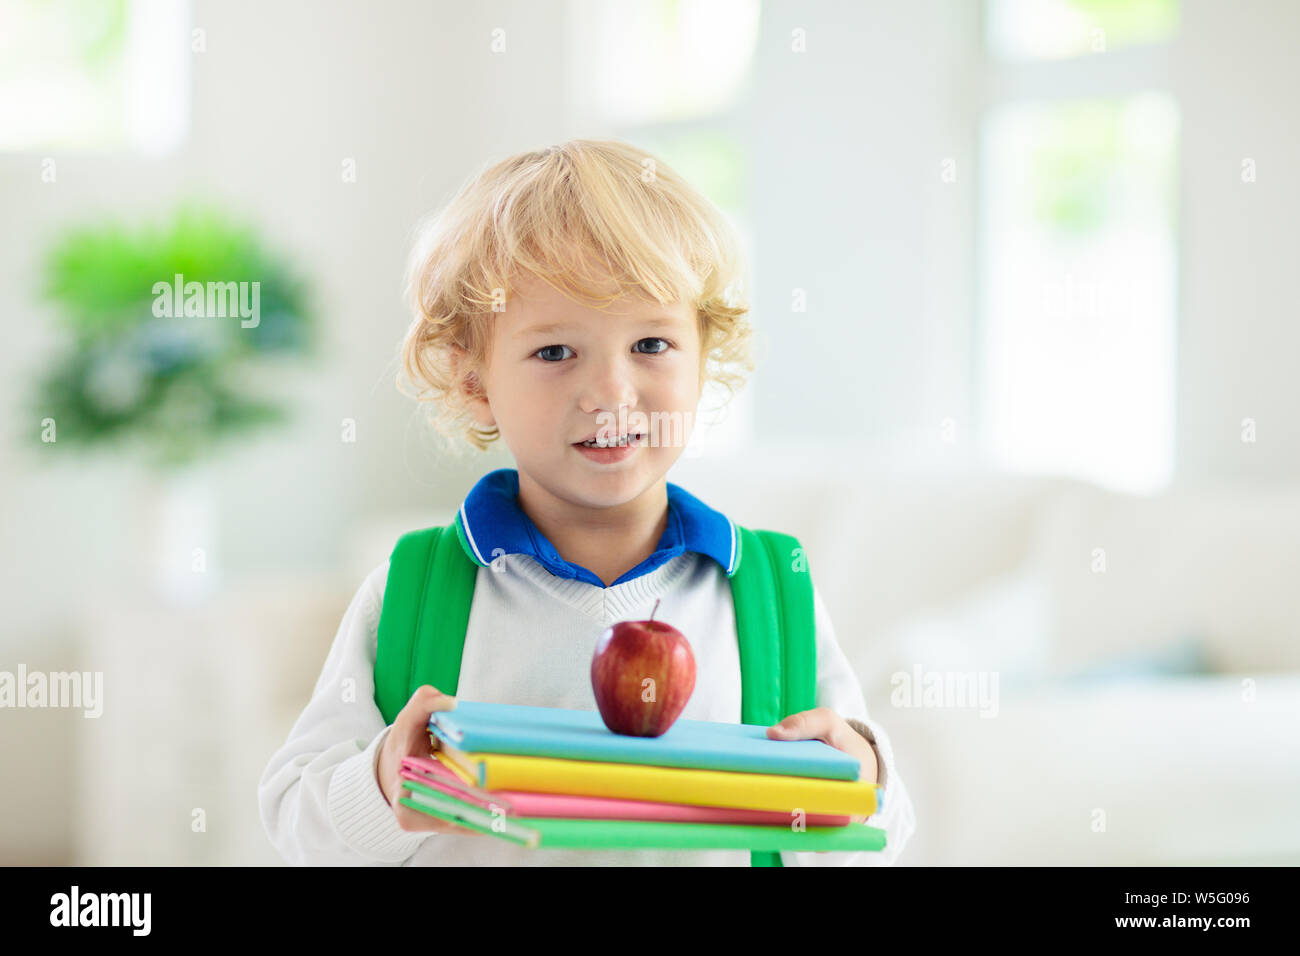 Child going back to school. Kid getting ready for first school day after vacation. Little boy on his way to kindergarten or preschool. Student packing Stock Photo